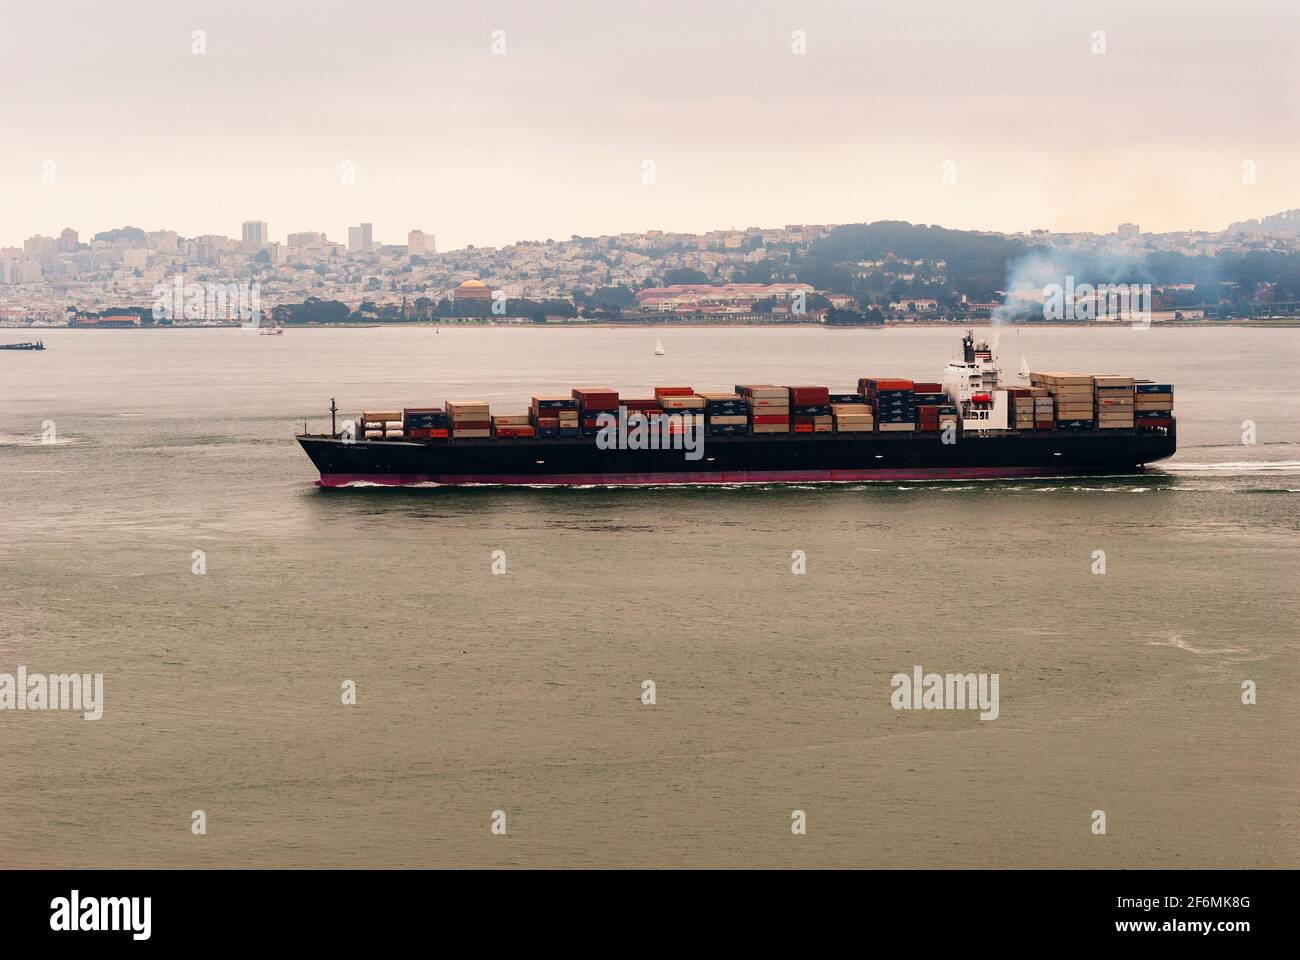 A container barge carrying goods sails in San Francisco bay with San Francisco in the background. California, USA. Stock Photo